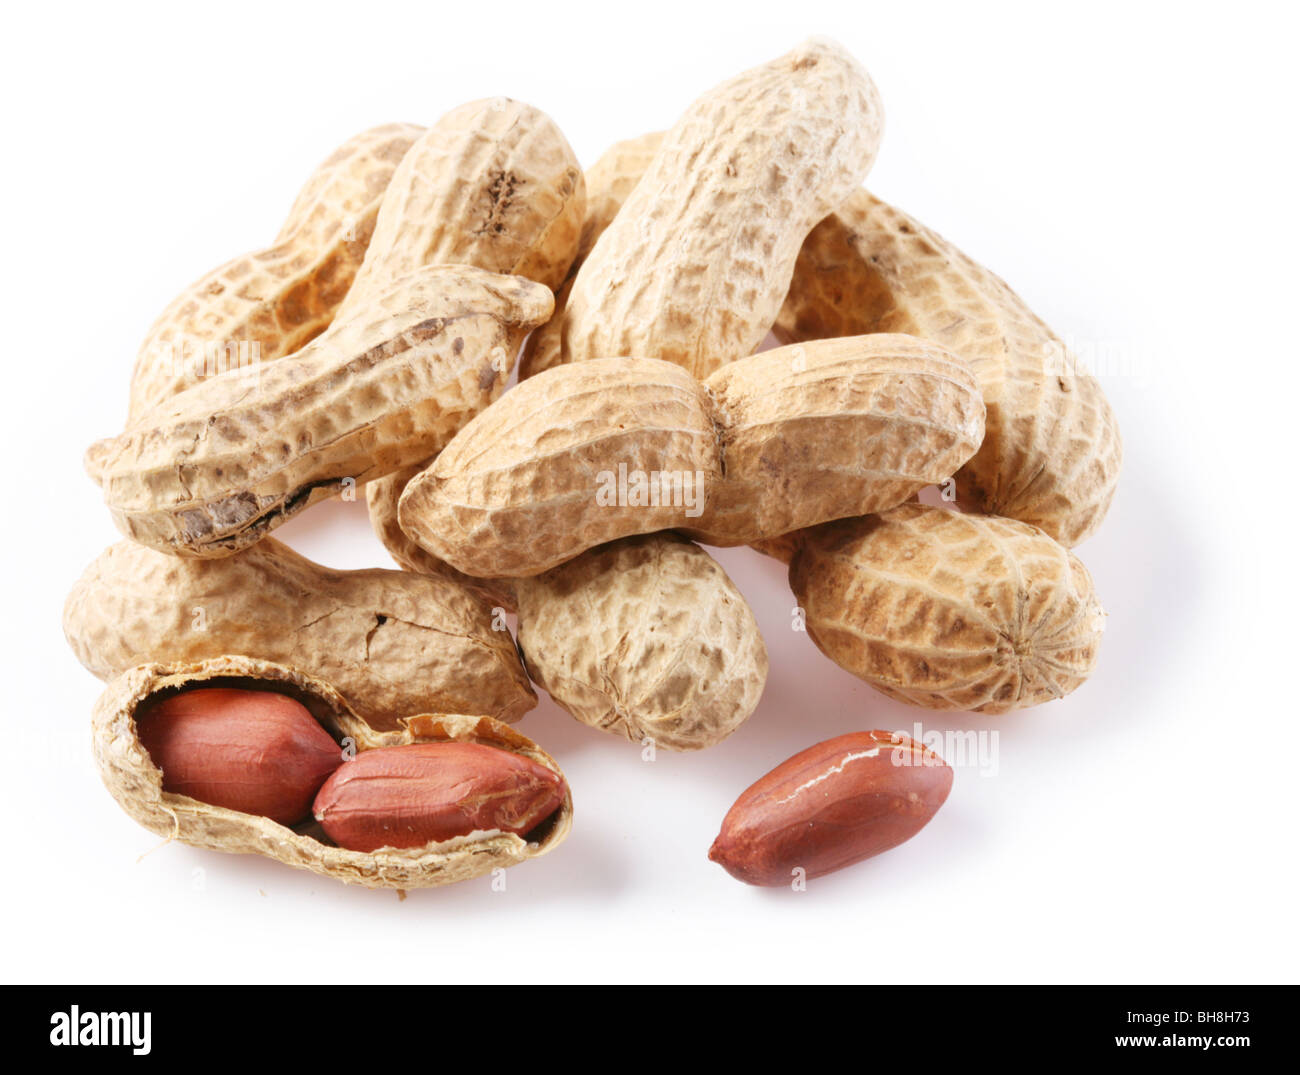 peanuts in shell on a white background Stock Photo